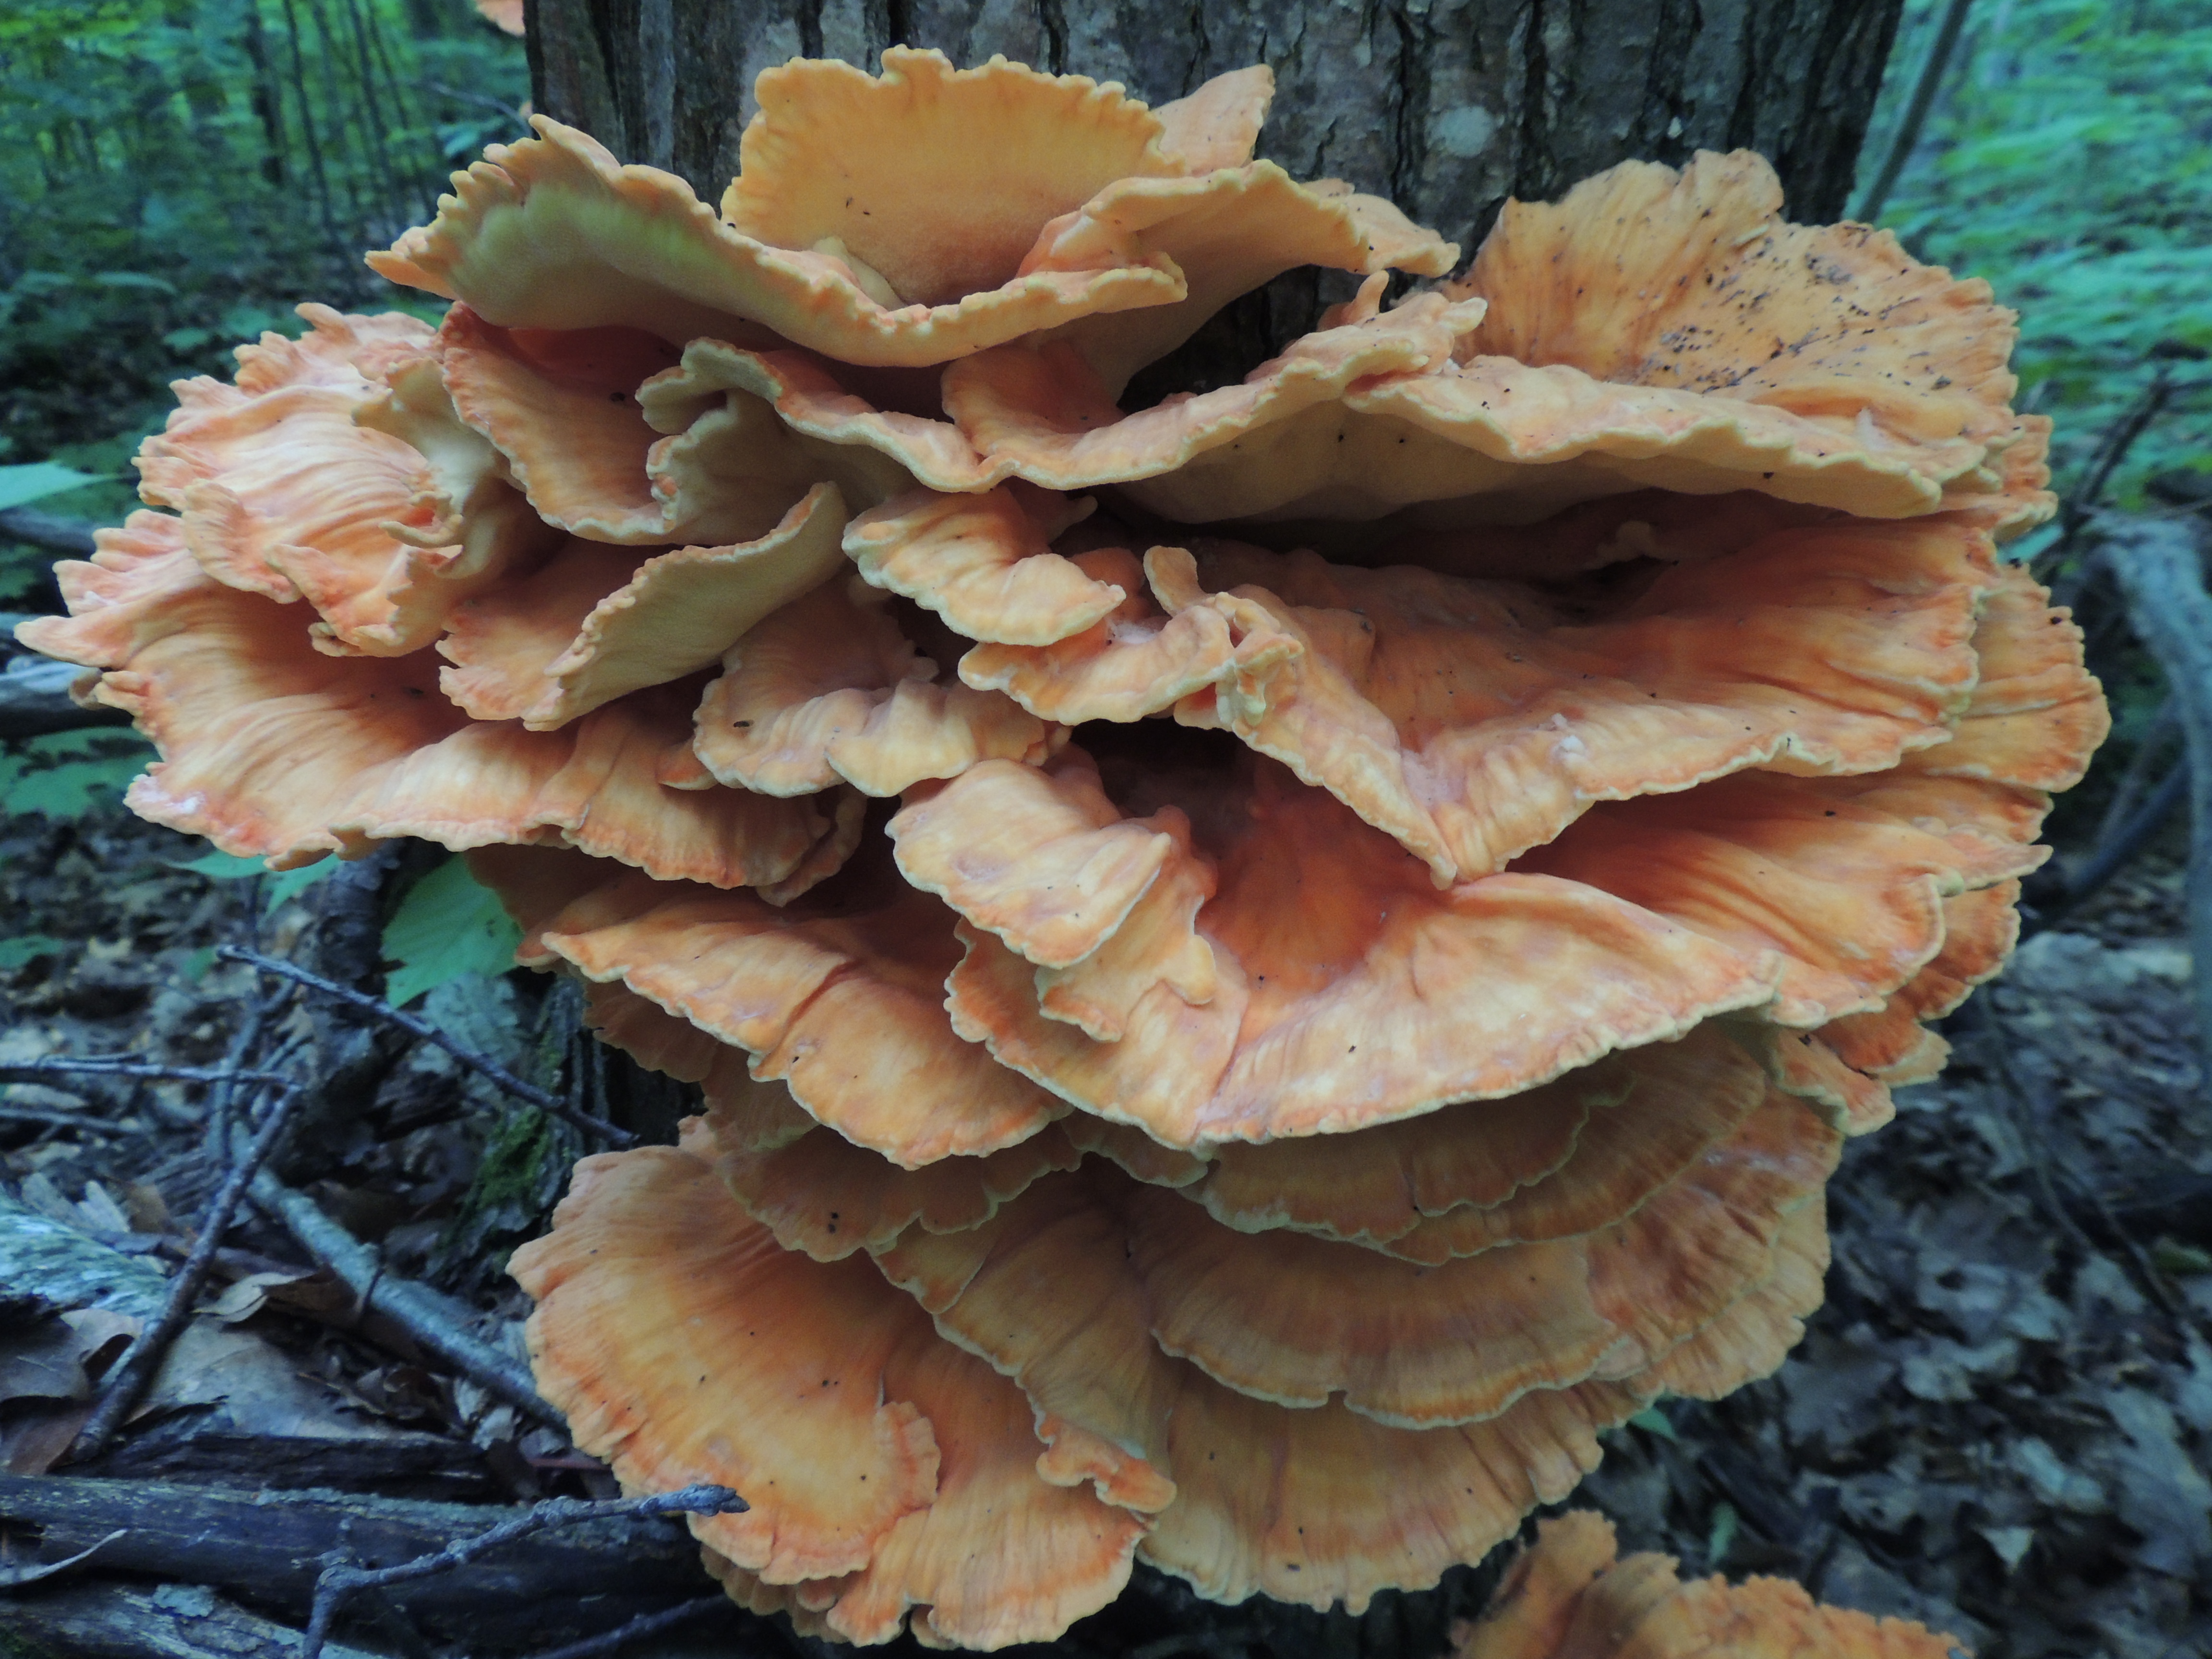 Chicken of the Woods Mushroom © Copyright 2015 Awenda Provincial Park, All Rights Reserved